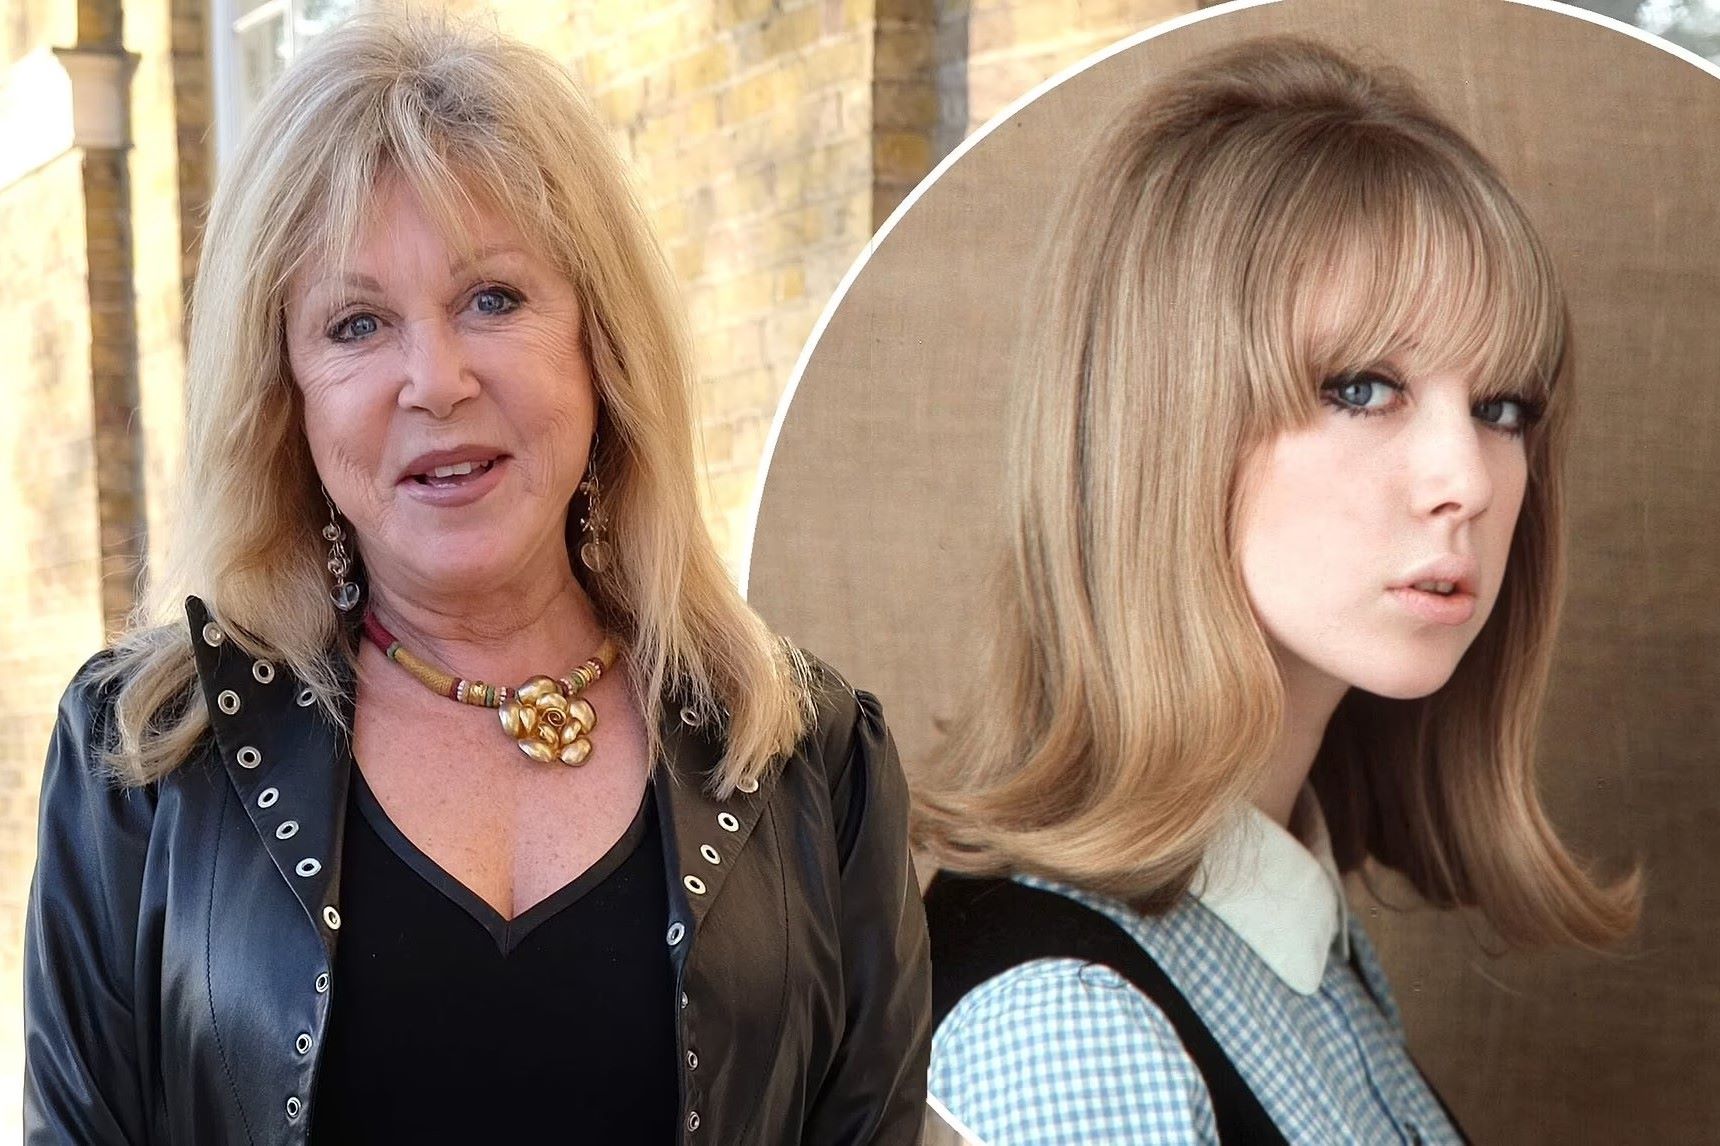 17 Extraordinary Facts About Pattie Boyd - Facts.net